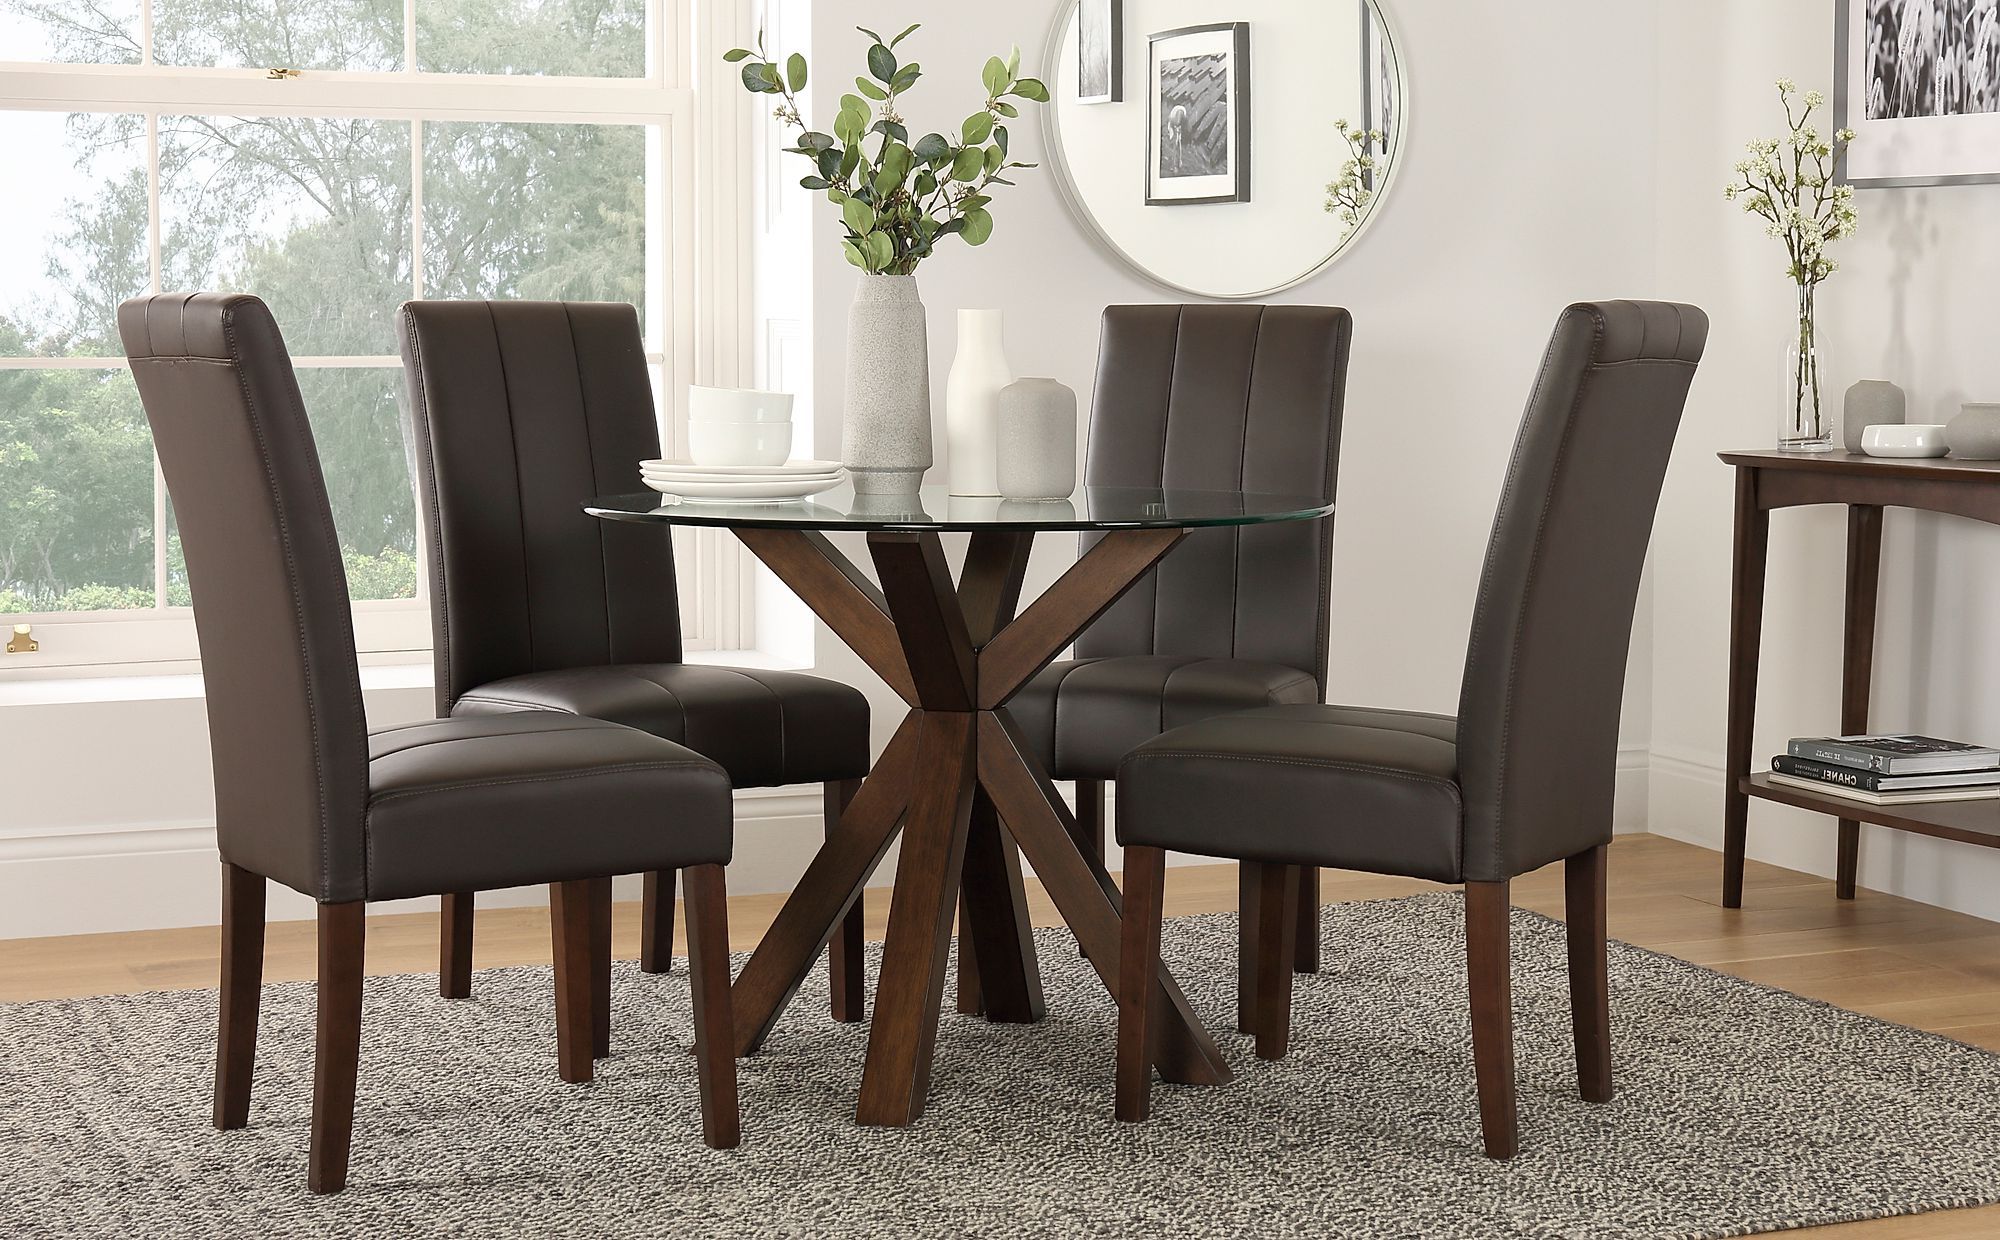 Dark Brown Round Dining Tables Intended For Most Popular Hatton Round Dark Wood And Glass Dining Table With  (View 6 of 20)